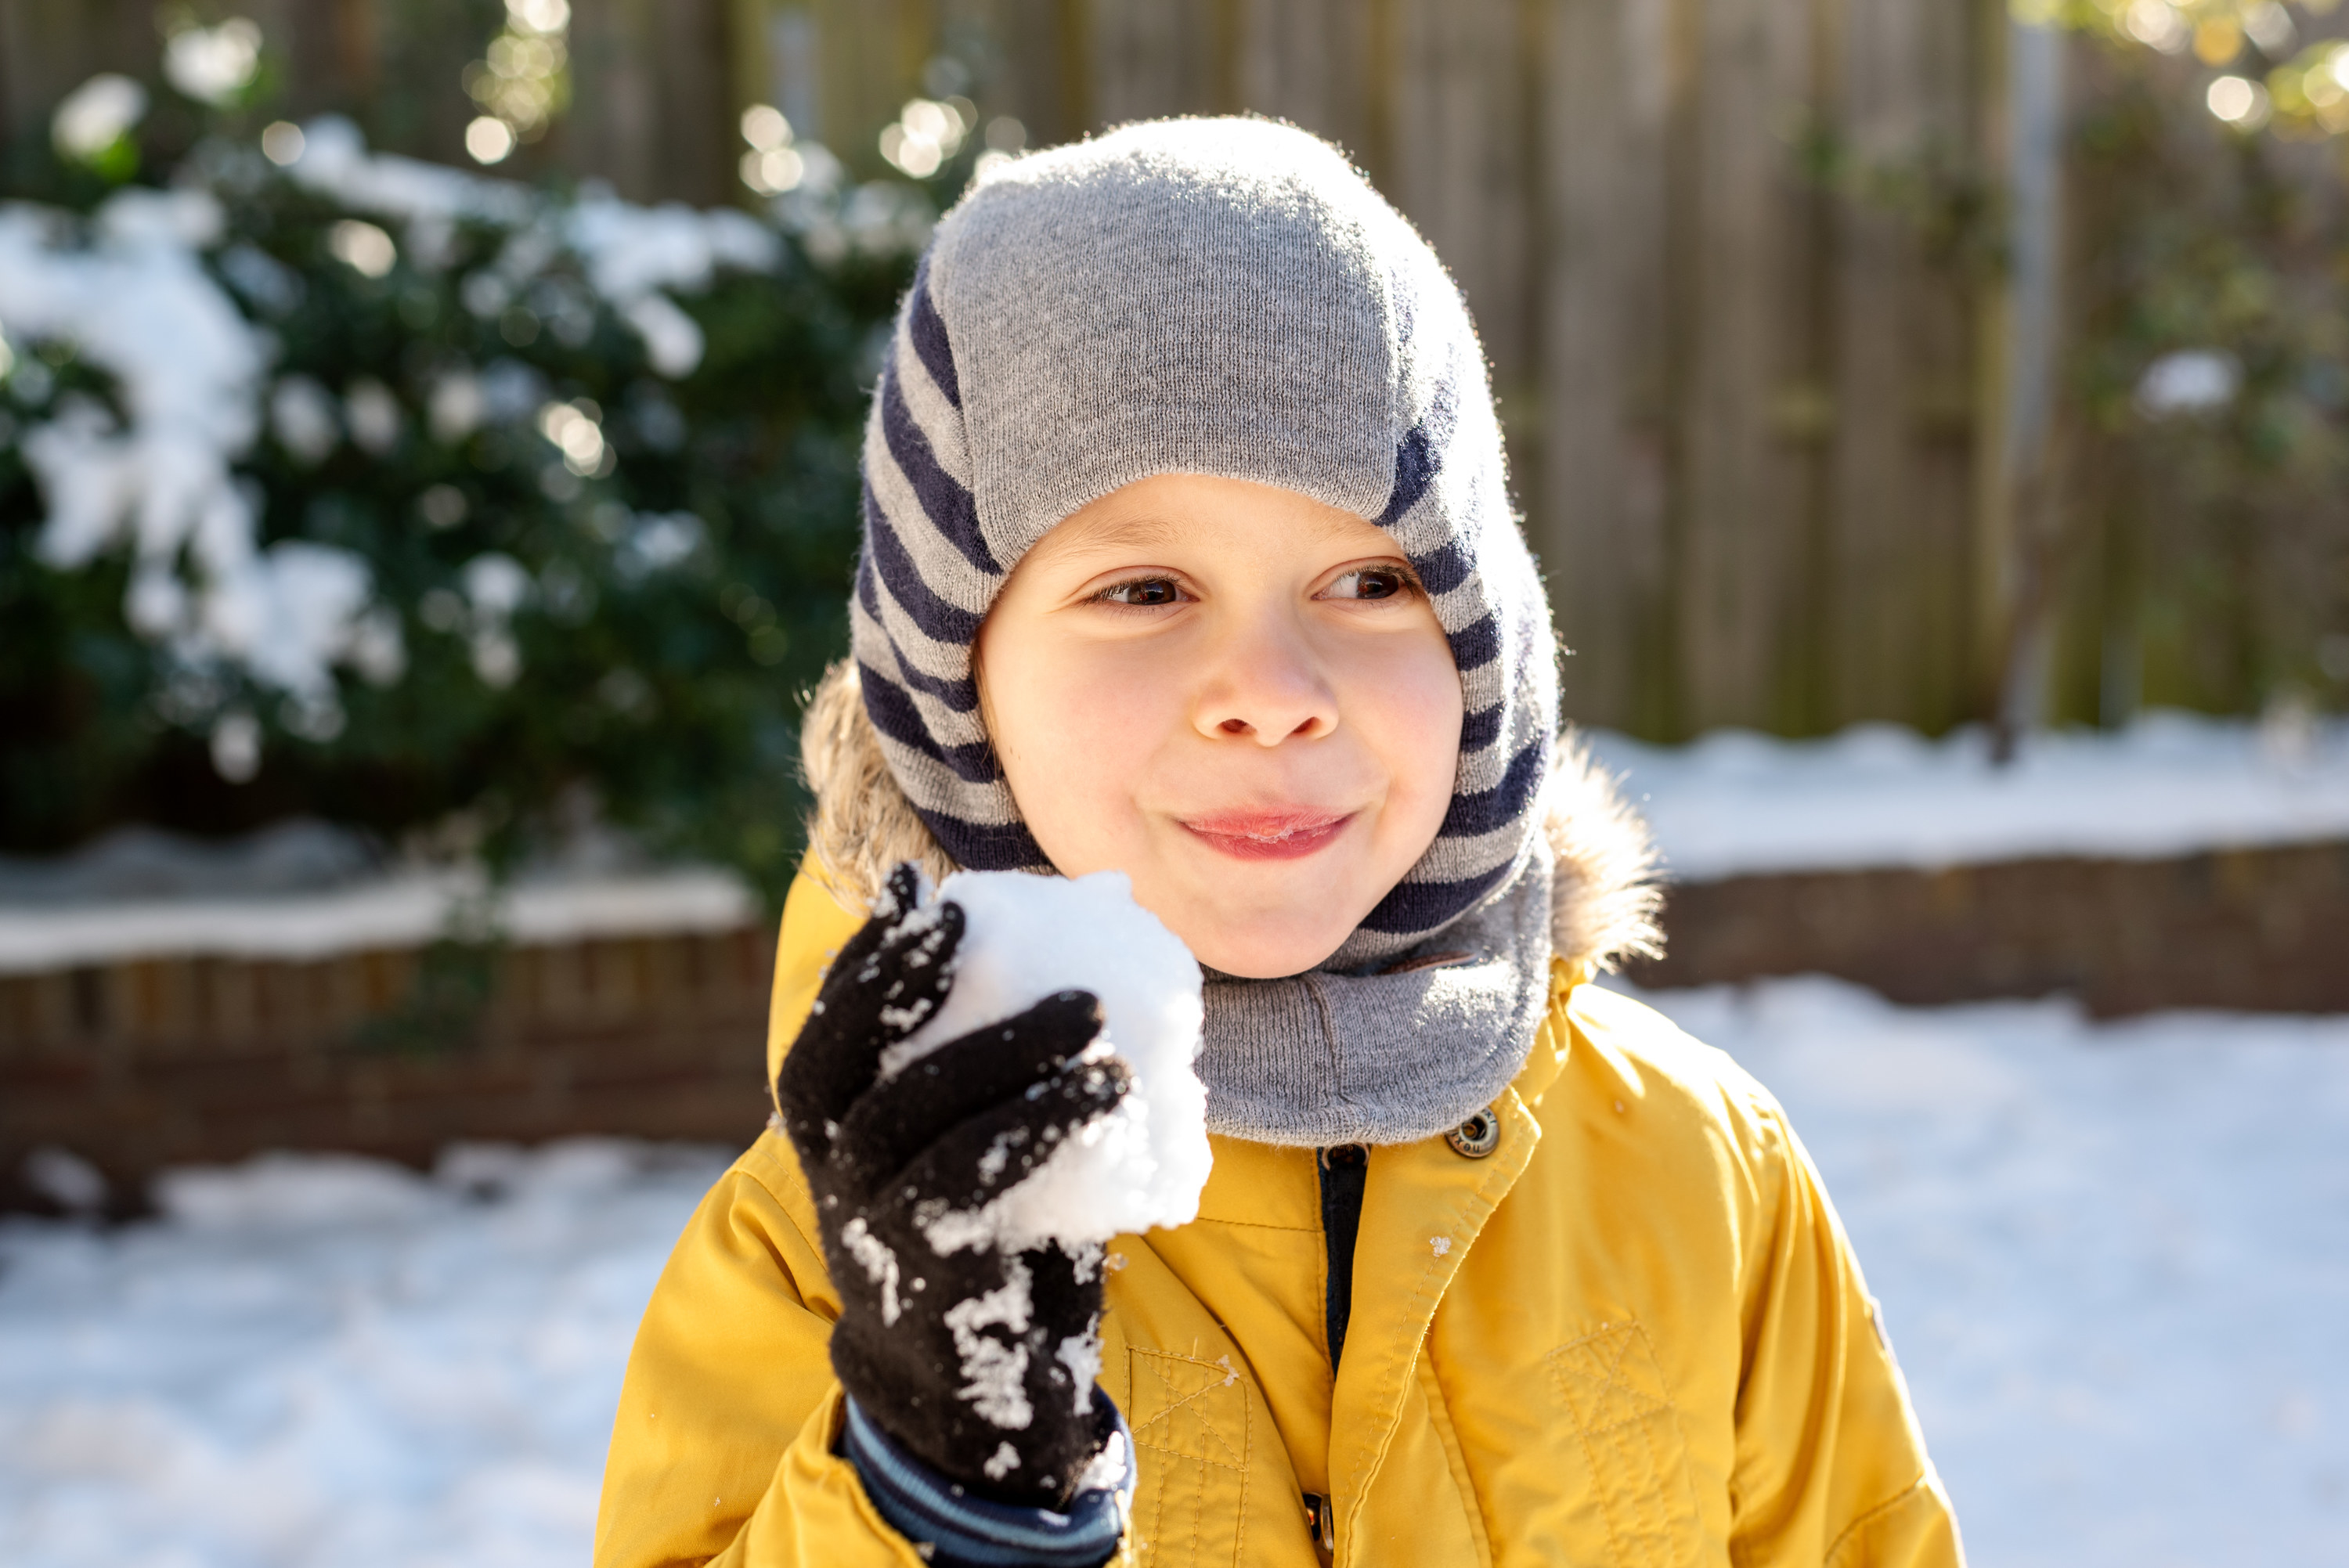 A kid outside in coat and warm hat smiling, holding a snowball in gloved hand